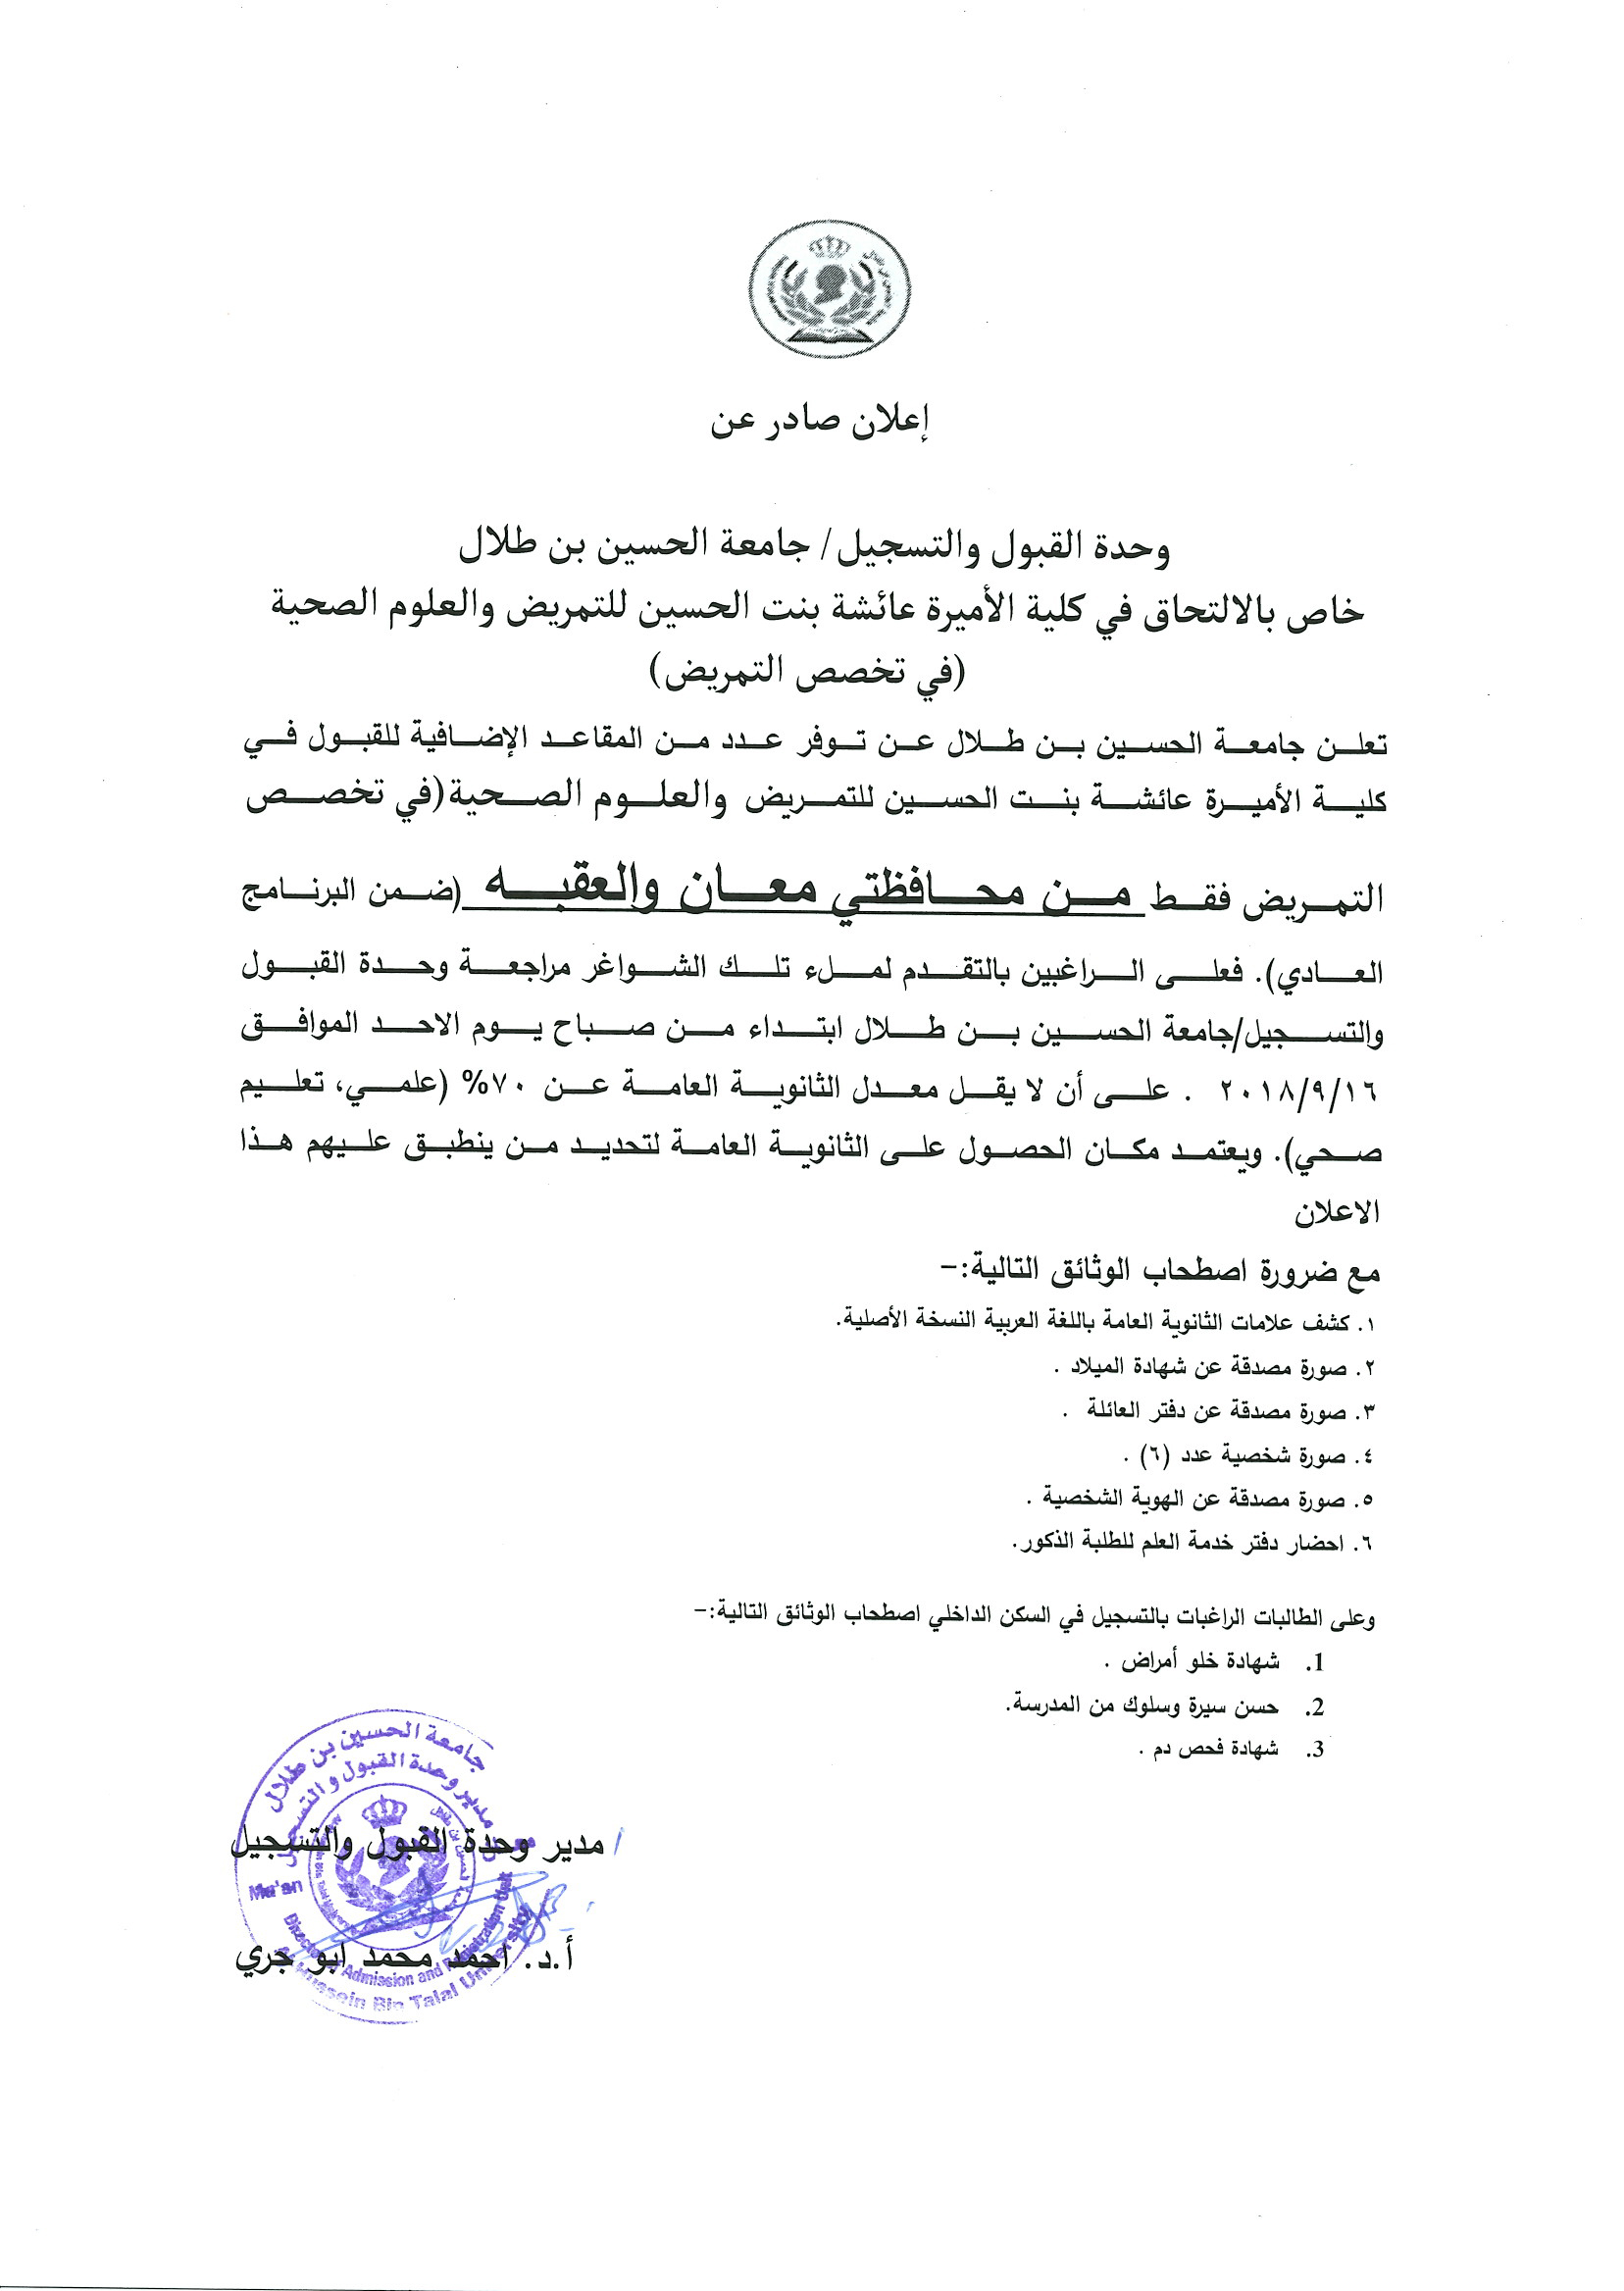 Availability of vacancies for students of Ma'an and Aqaba / Nursing